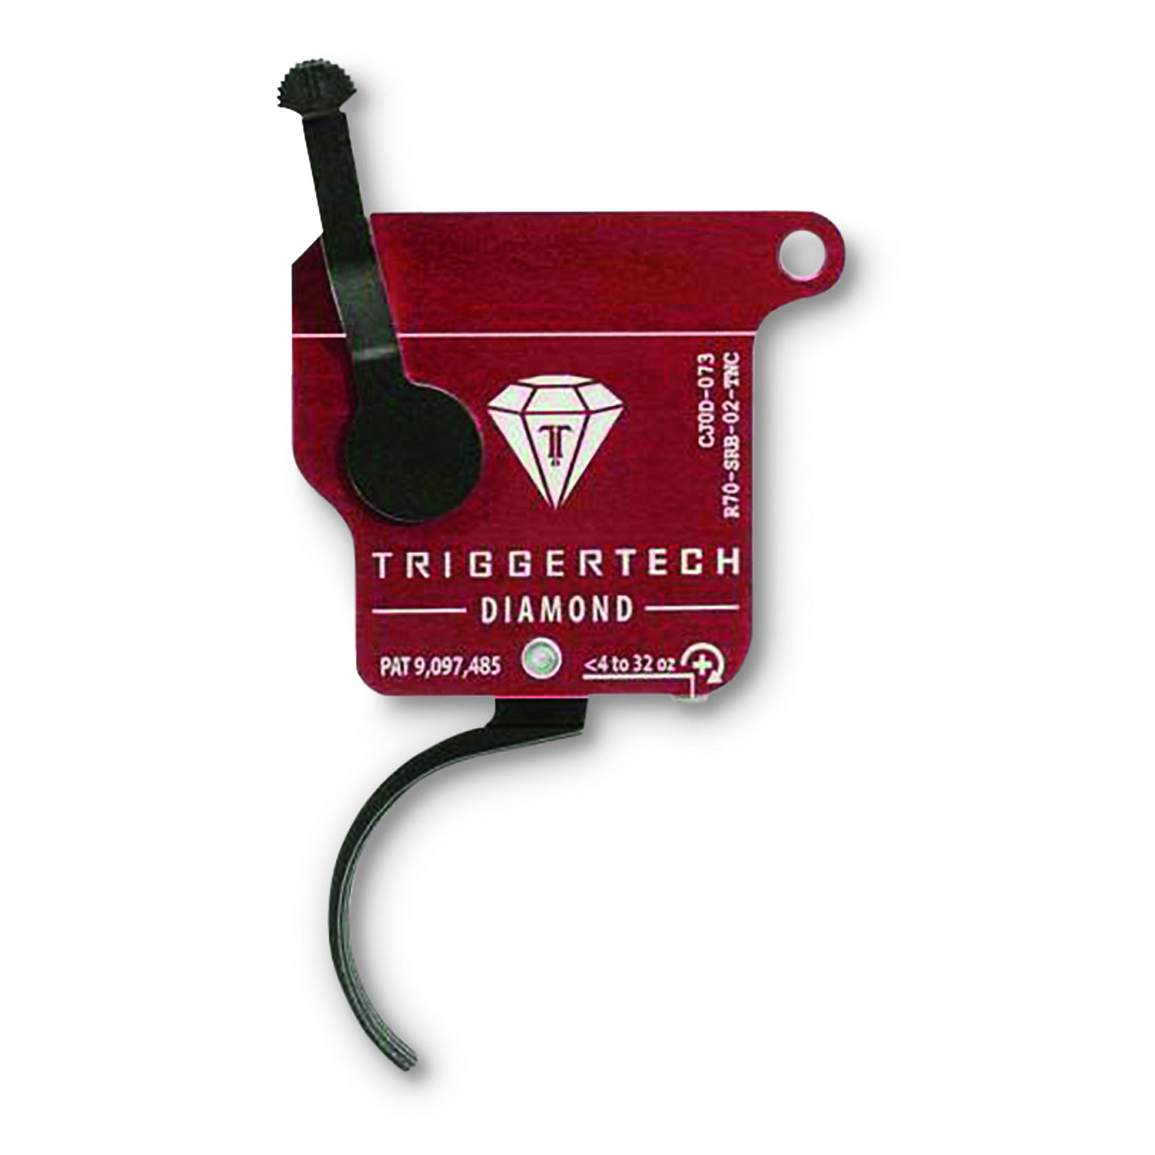 TriggerTech Remington 700 Diamond Single-Stage Traditional Curved Trigger, Right Hand, No Bolt Rel.